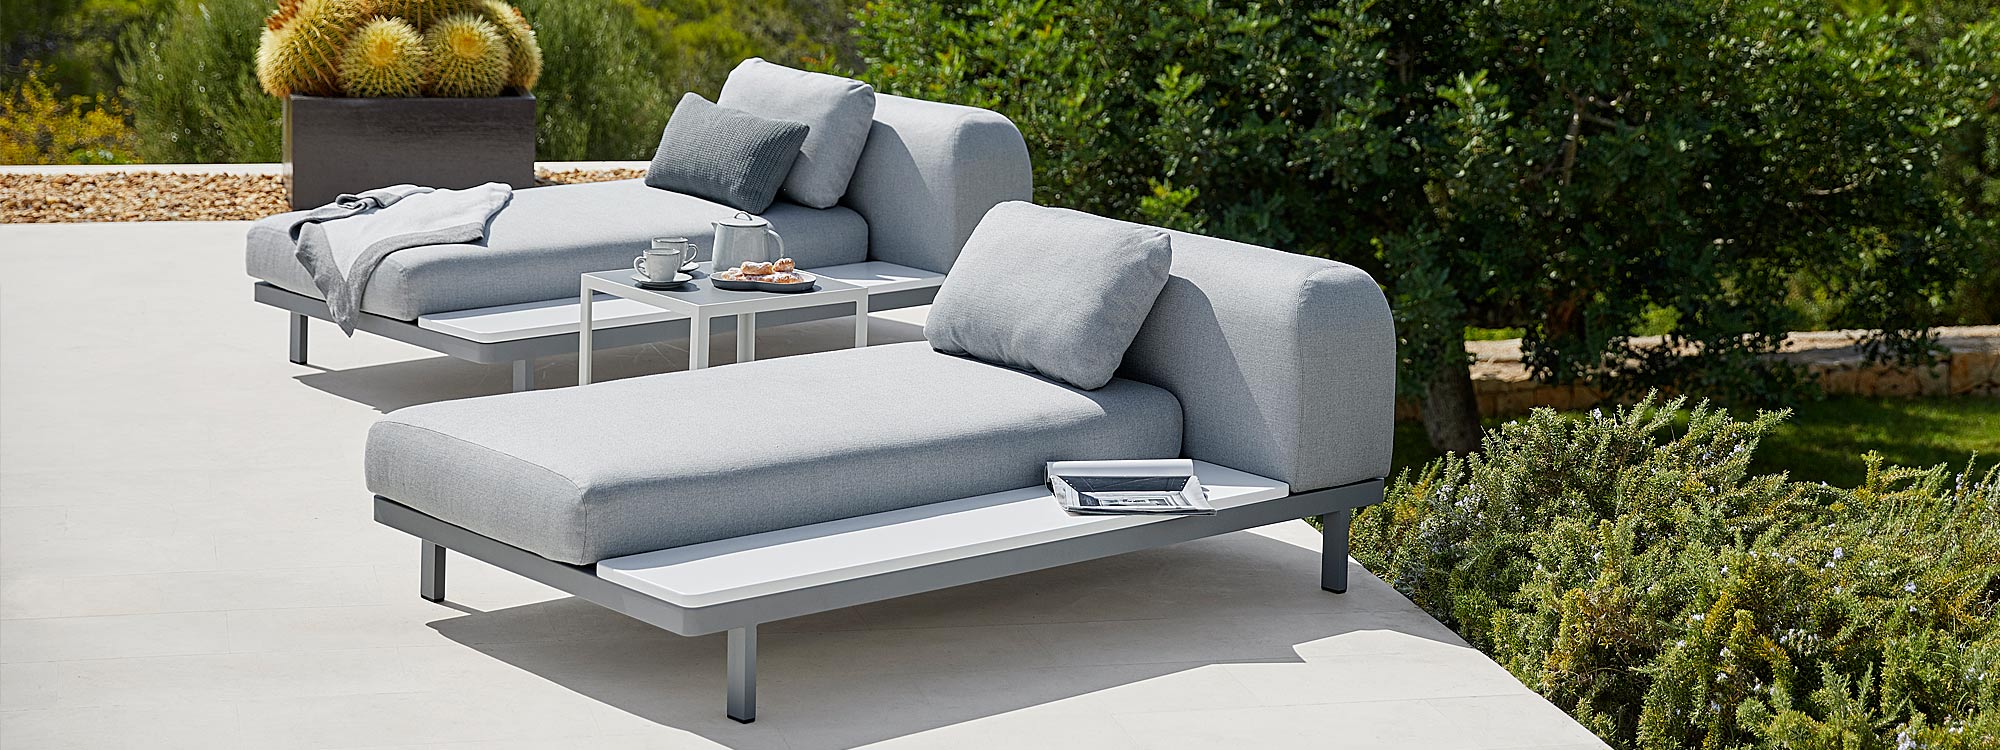 Space garden sofa can also be configured into single and twin outdoor daybeds.